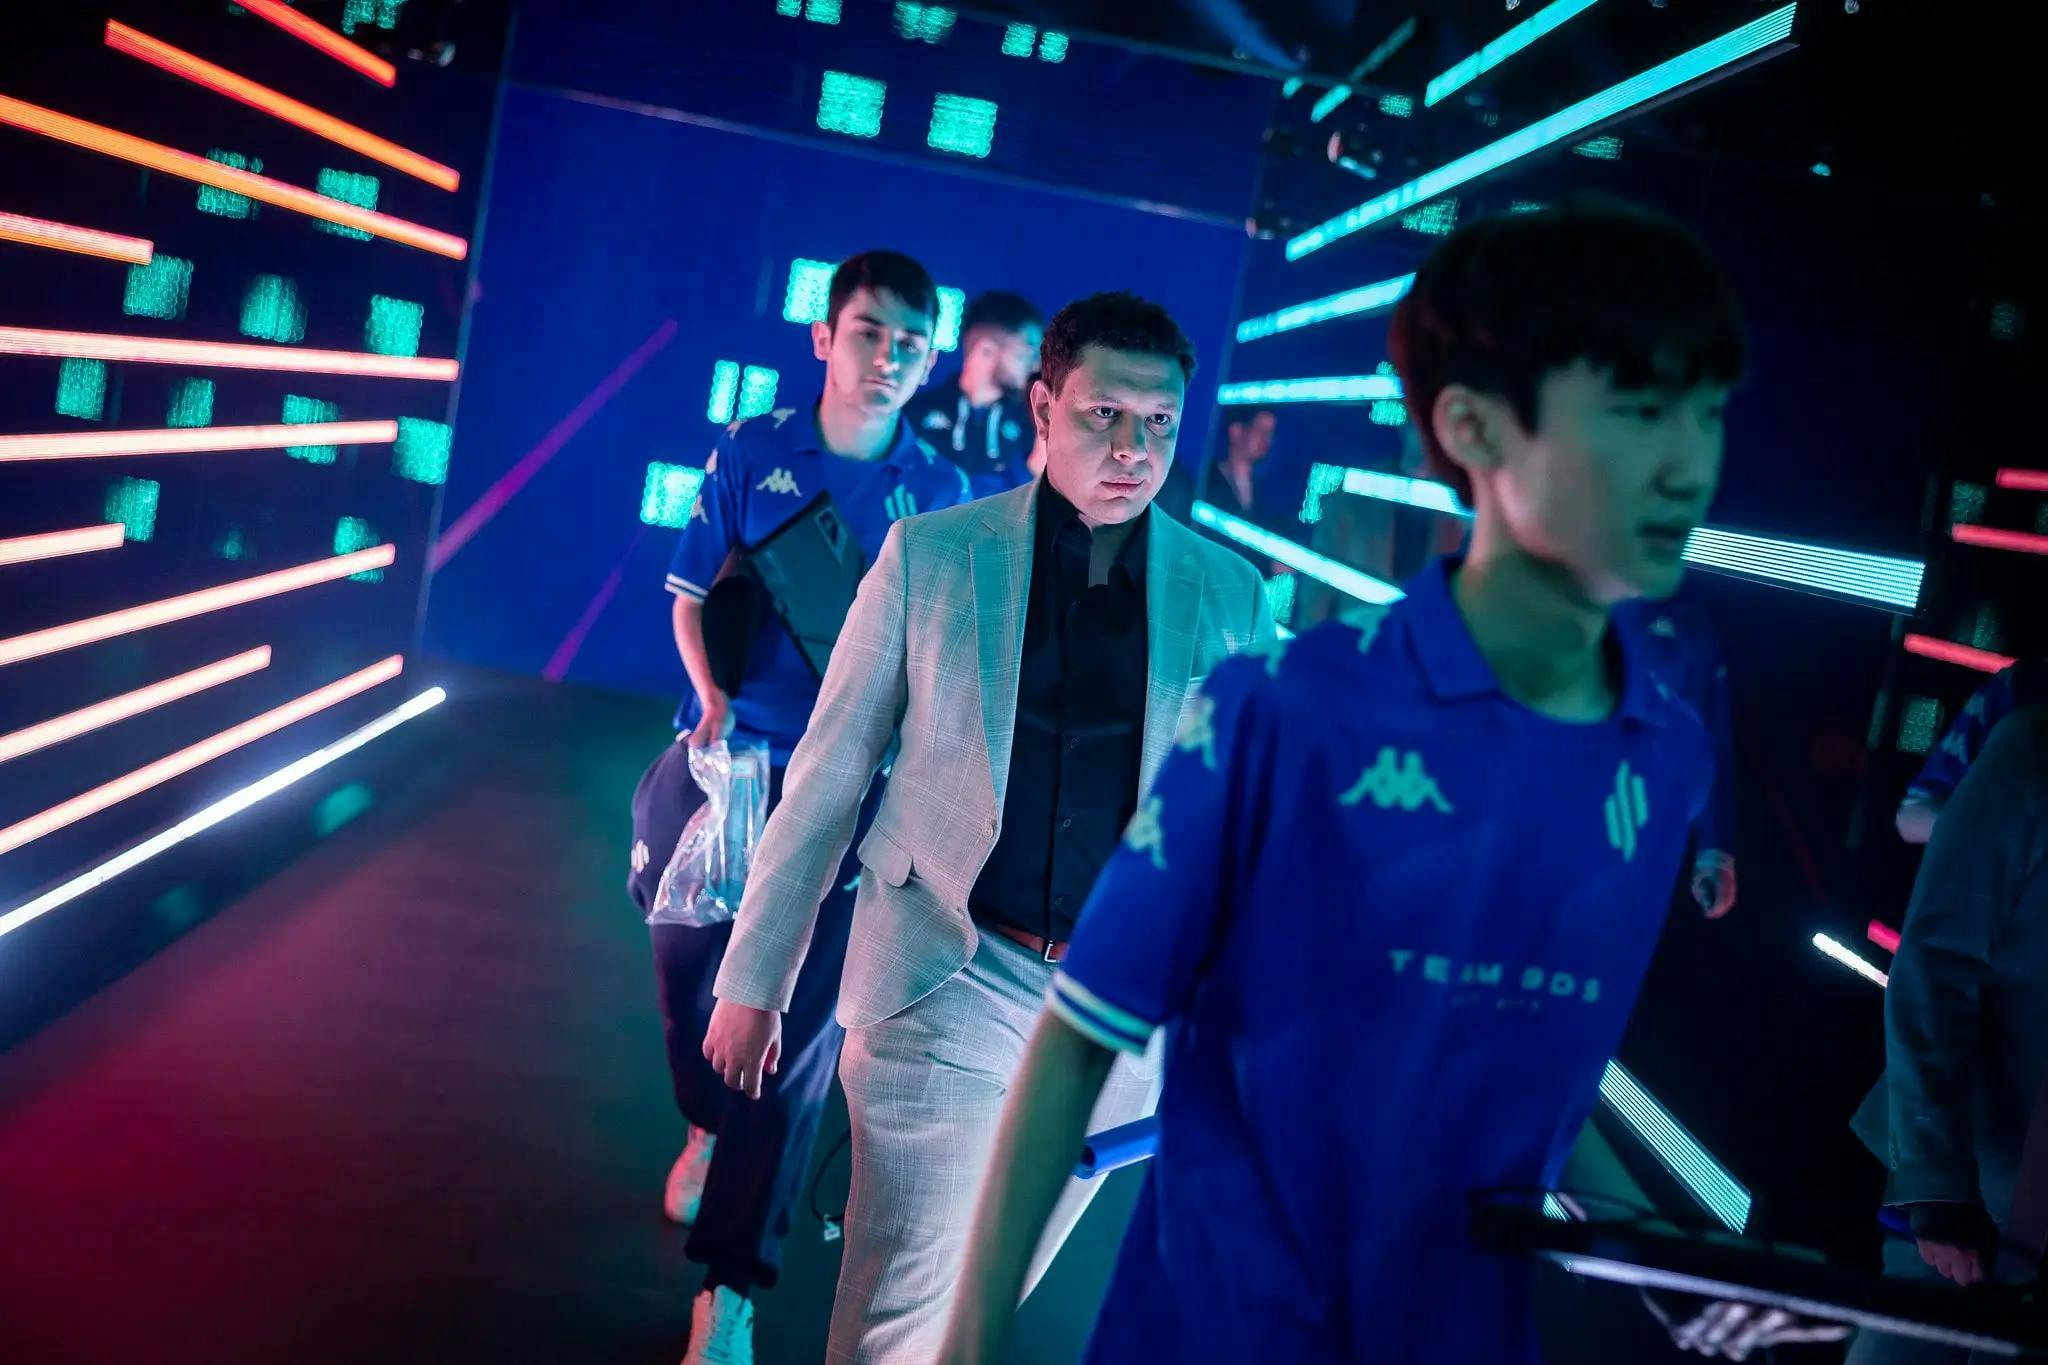 BDS Striker, walking on-stage with his team. Credit: Michal Konkol/Riot Games